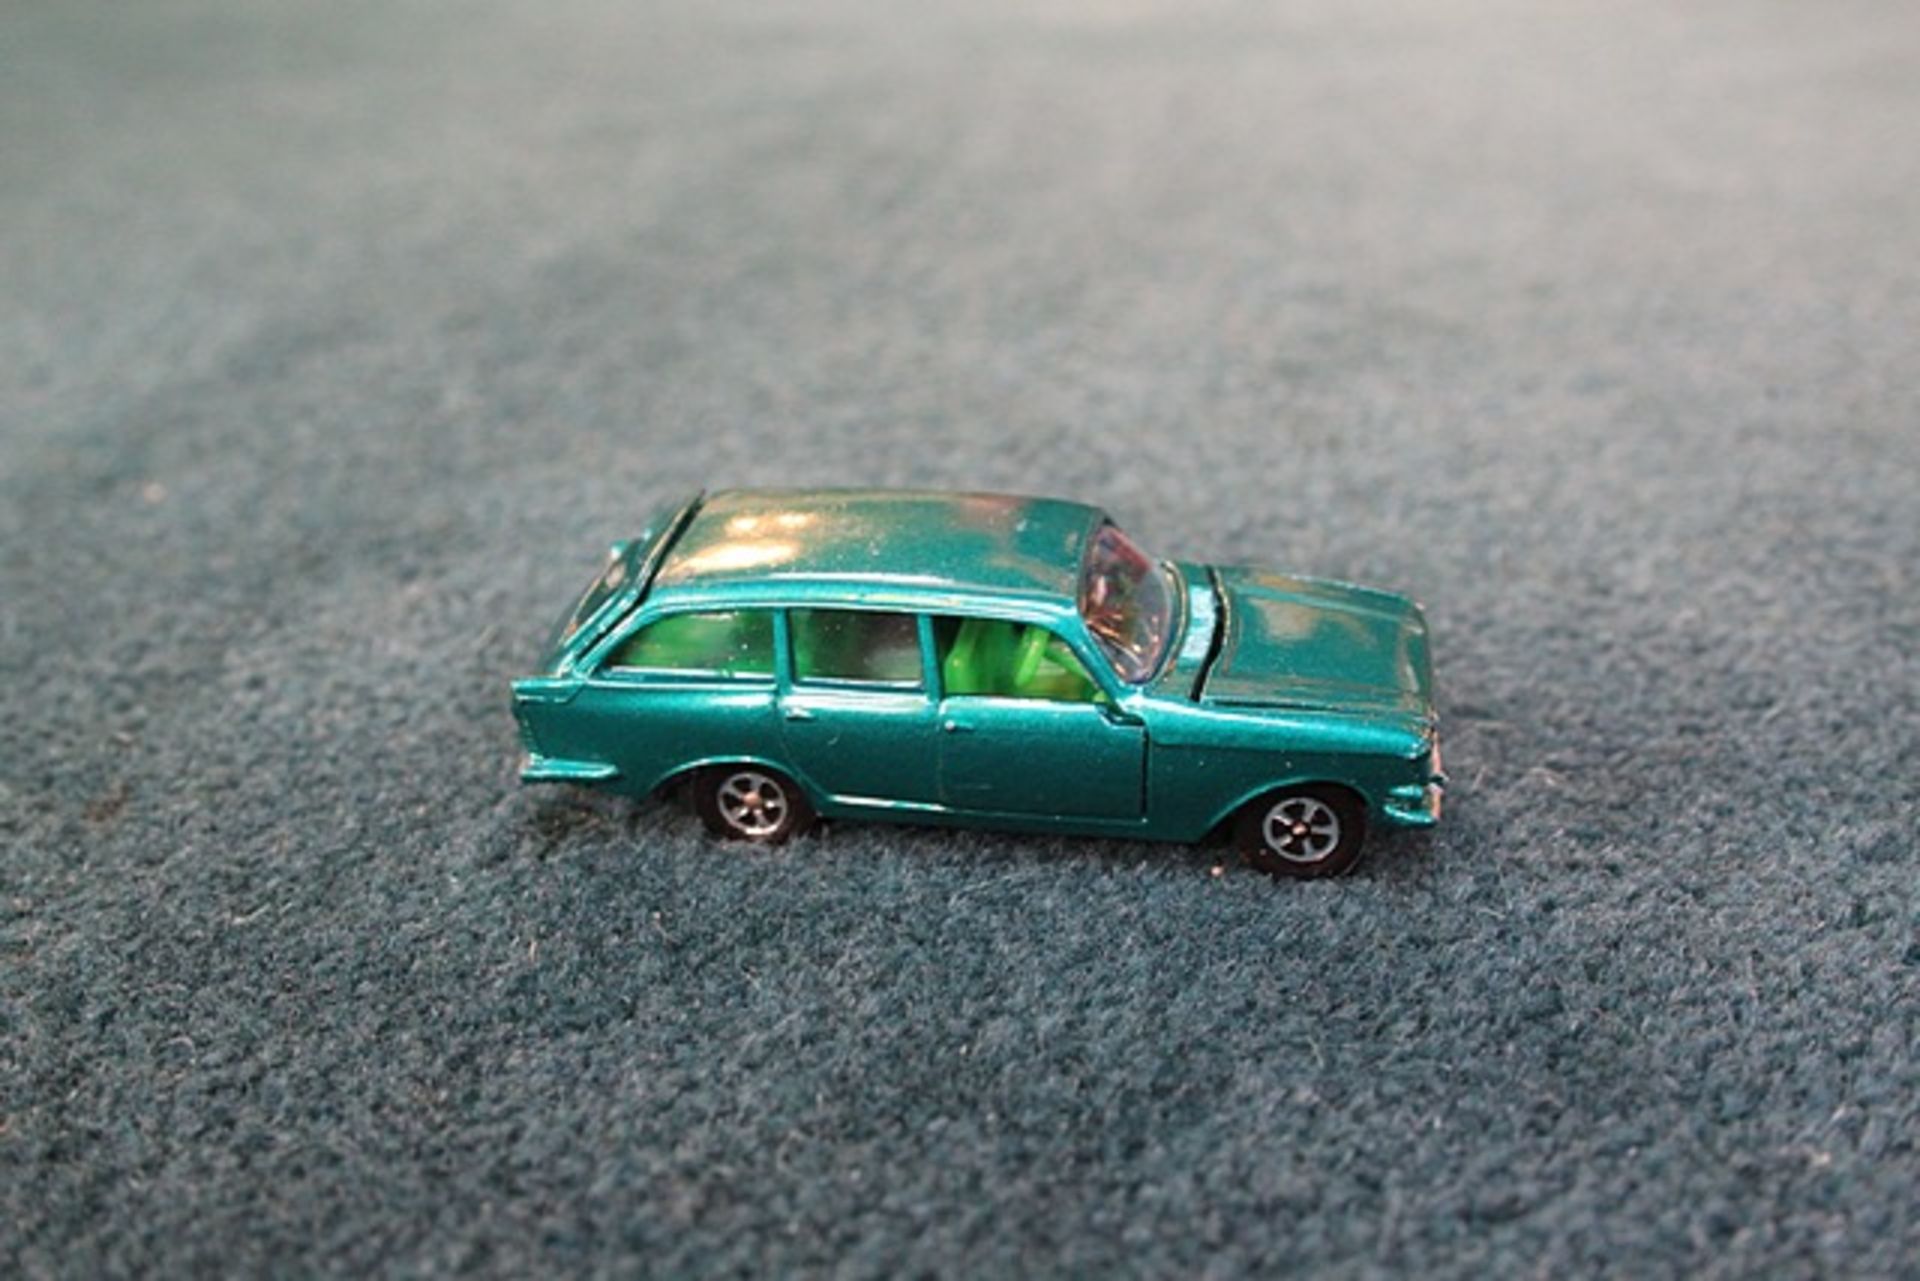 Lone Star Flyers #14 Diecast MKIII FORD ZODIAC ESTATE In Metallic Green And Green Interior With - Image 2 of 3